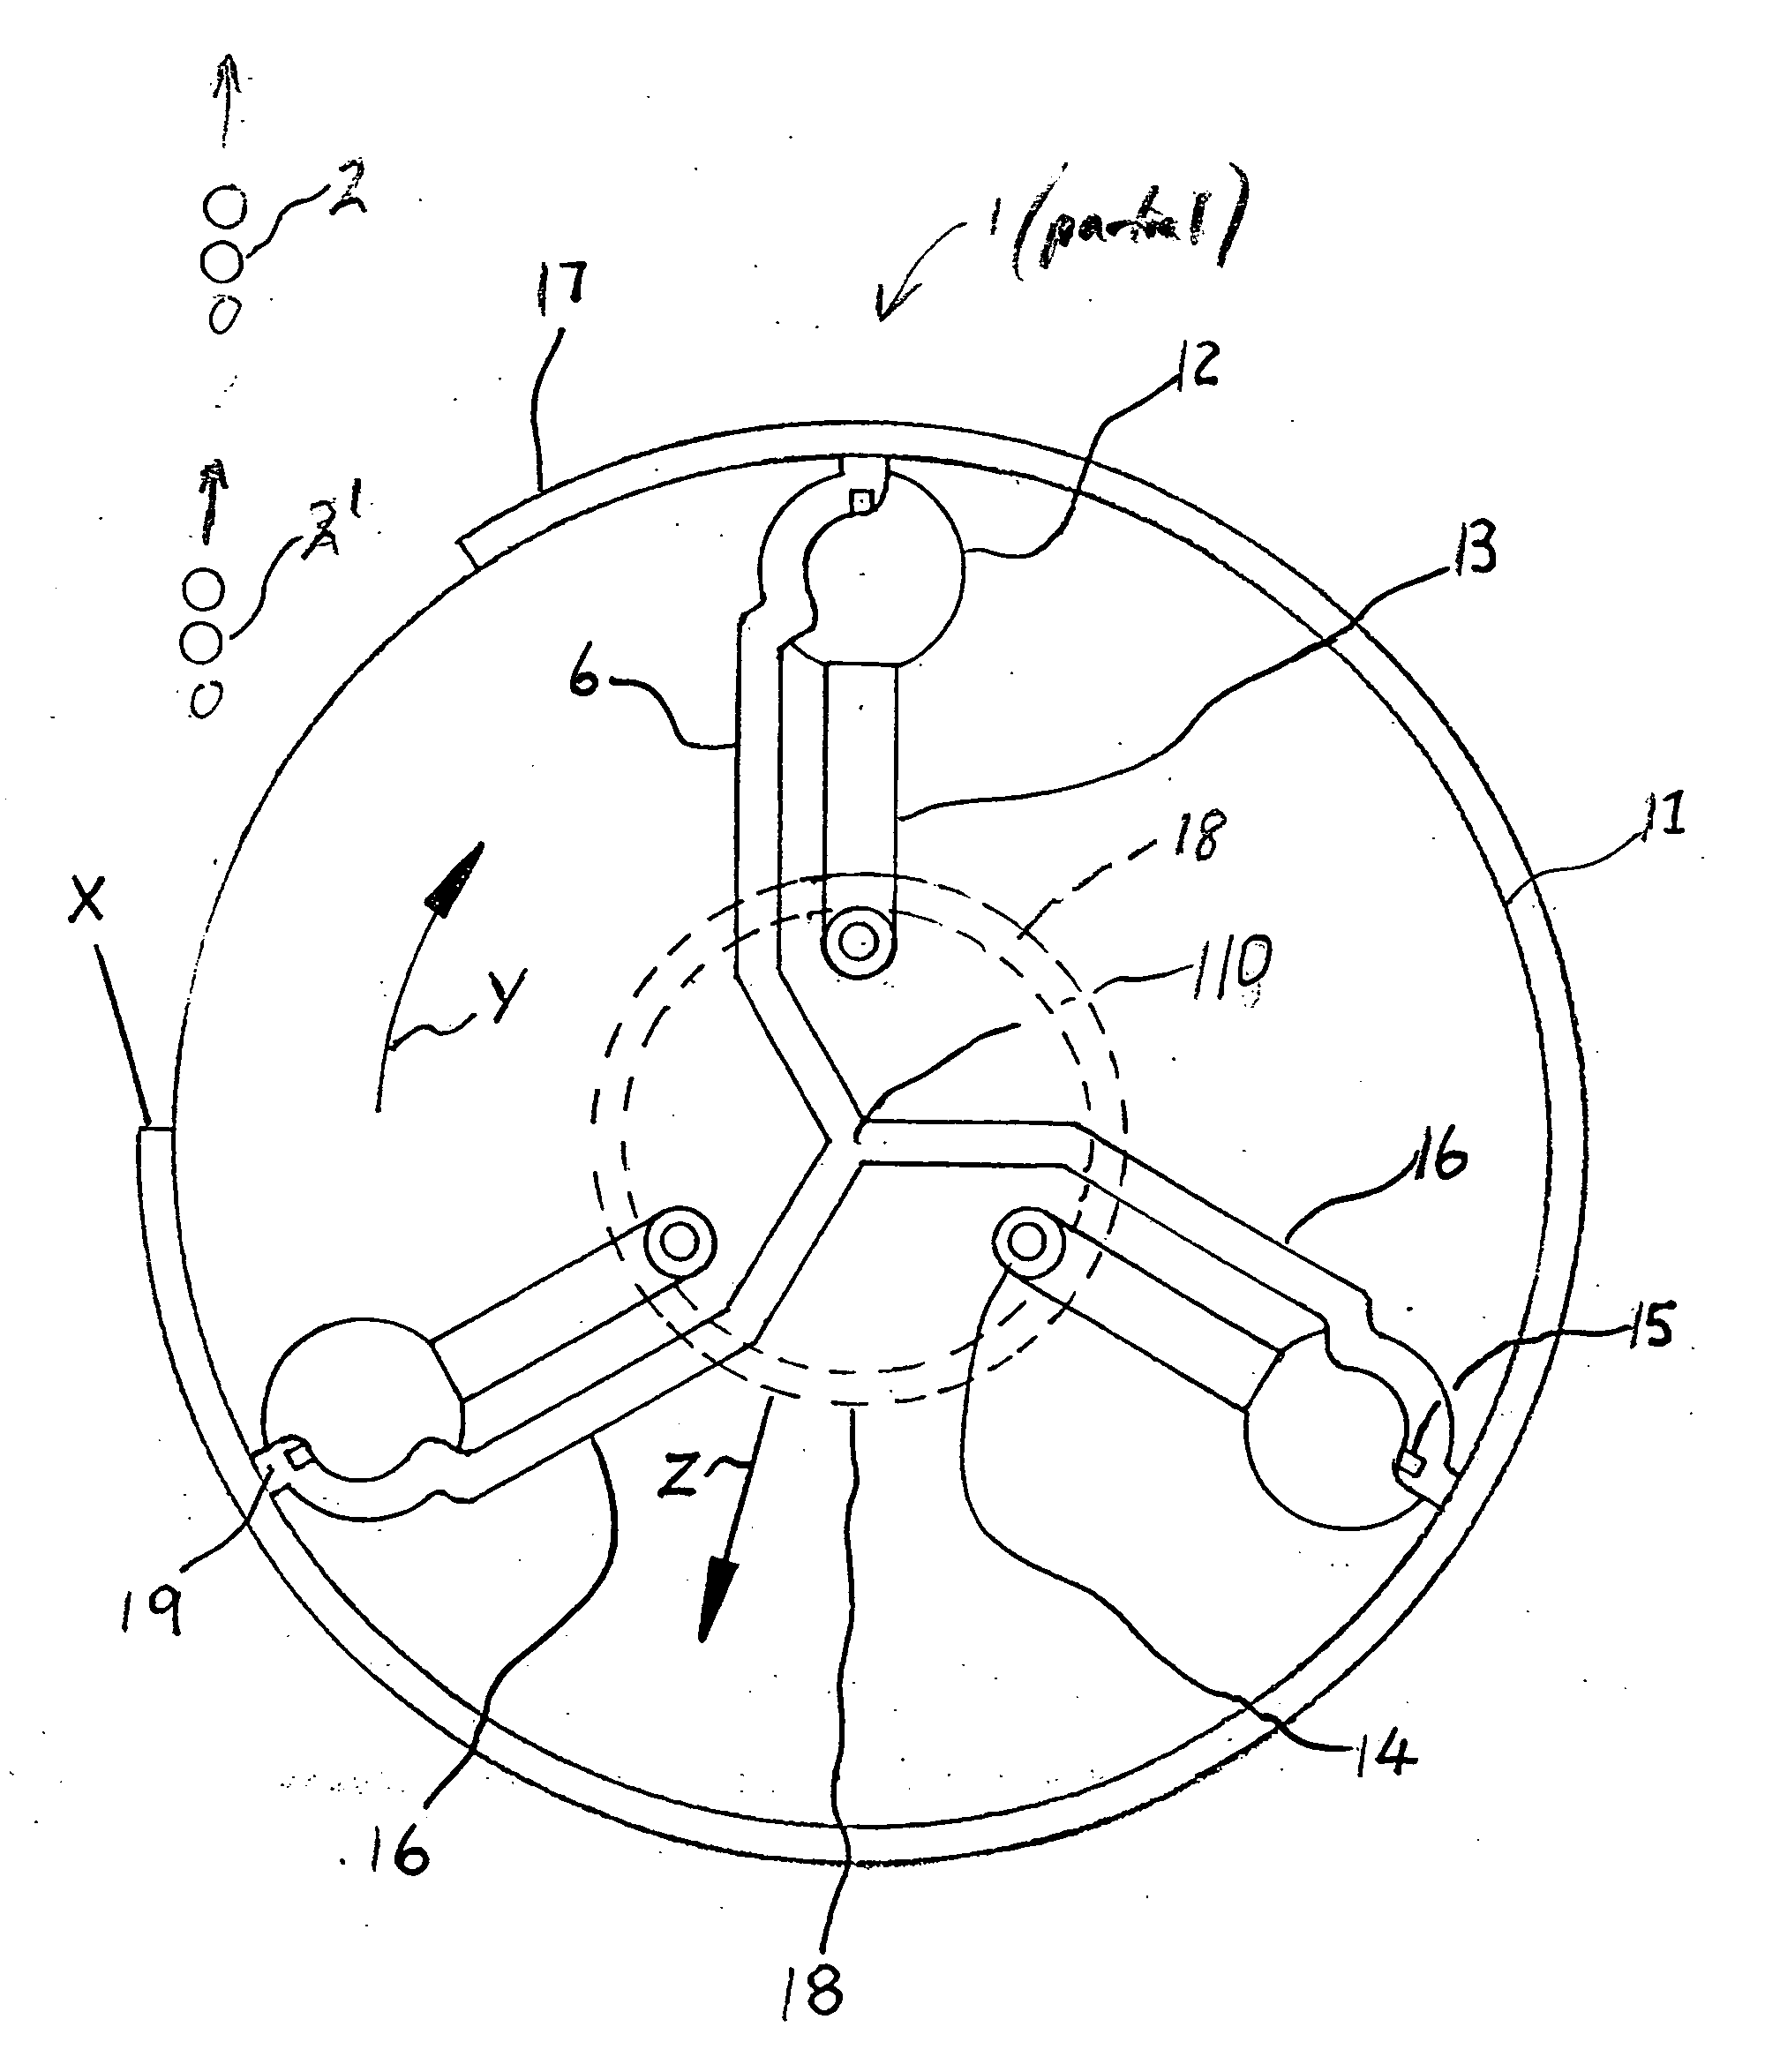 Low-mass-trigger controlled release of projectiles having variable energies and numbers in a centrifugal propulsion weapon, and methods of weapon use